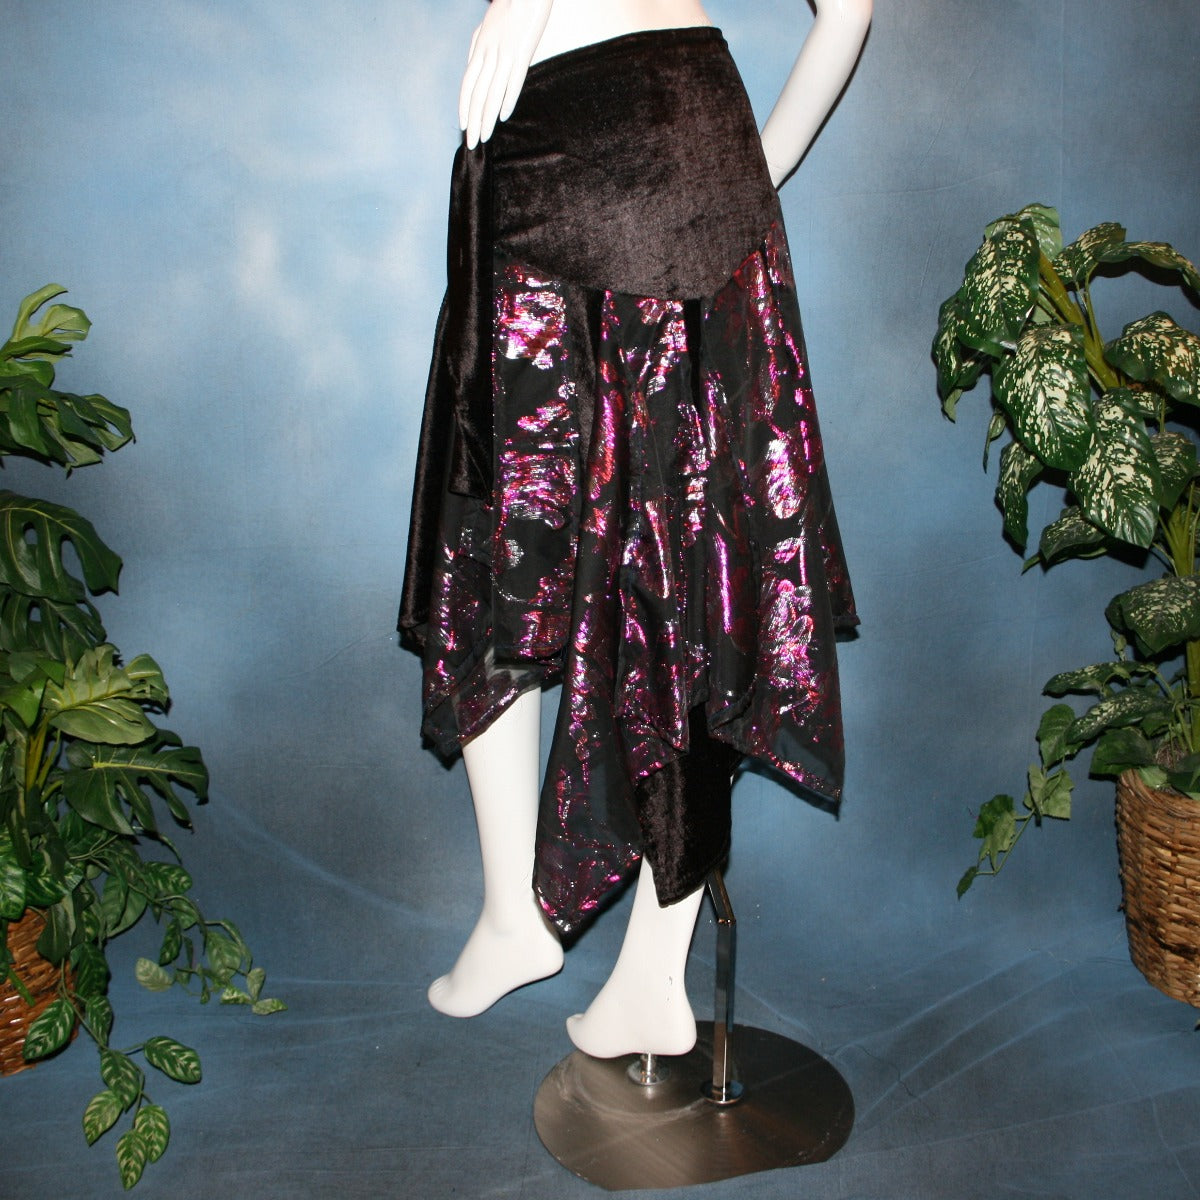 back view of Black Latin/rhythm skirt, wrap style,with scarf cut panels was created with yards of a black & fuchsia metallic cut & clip chiffon on a panne' velvet base with ruching & sash.